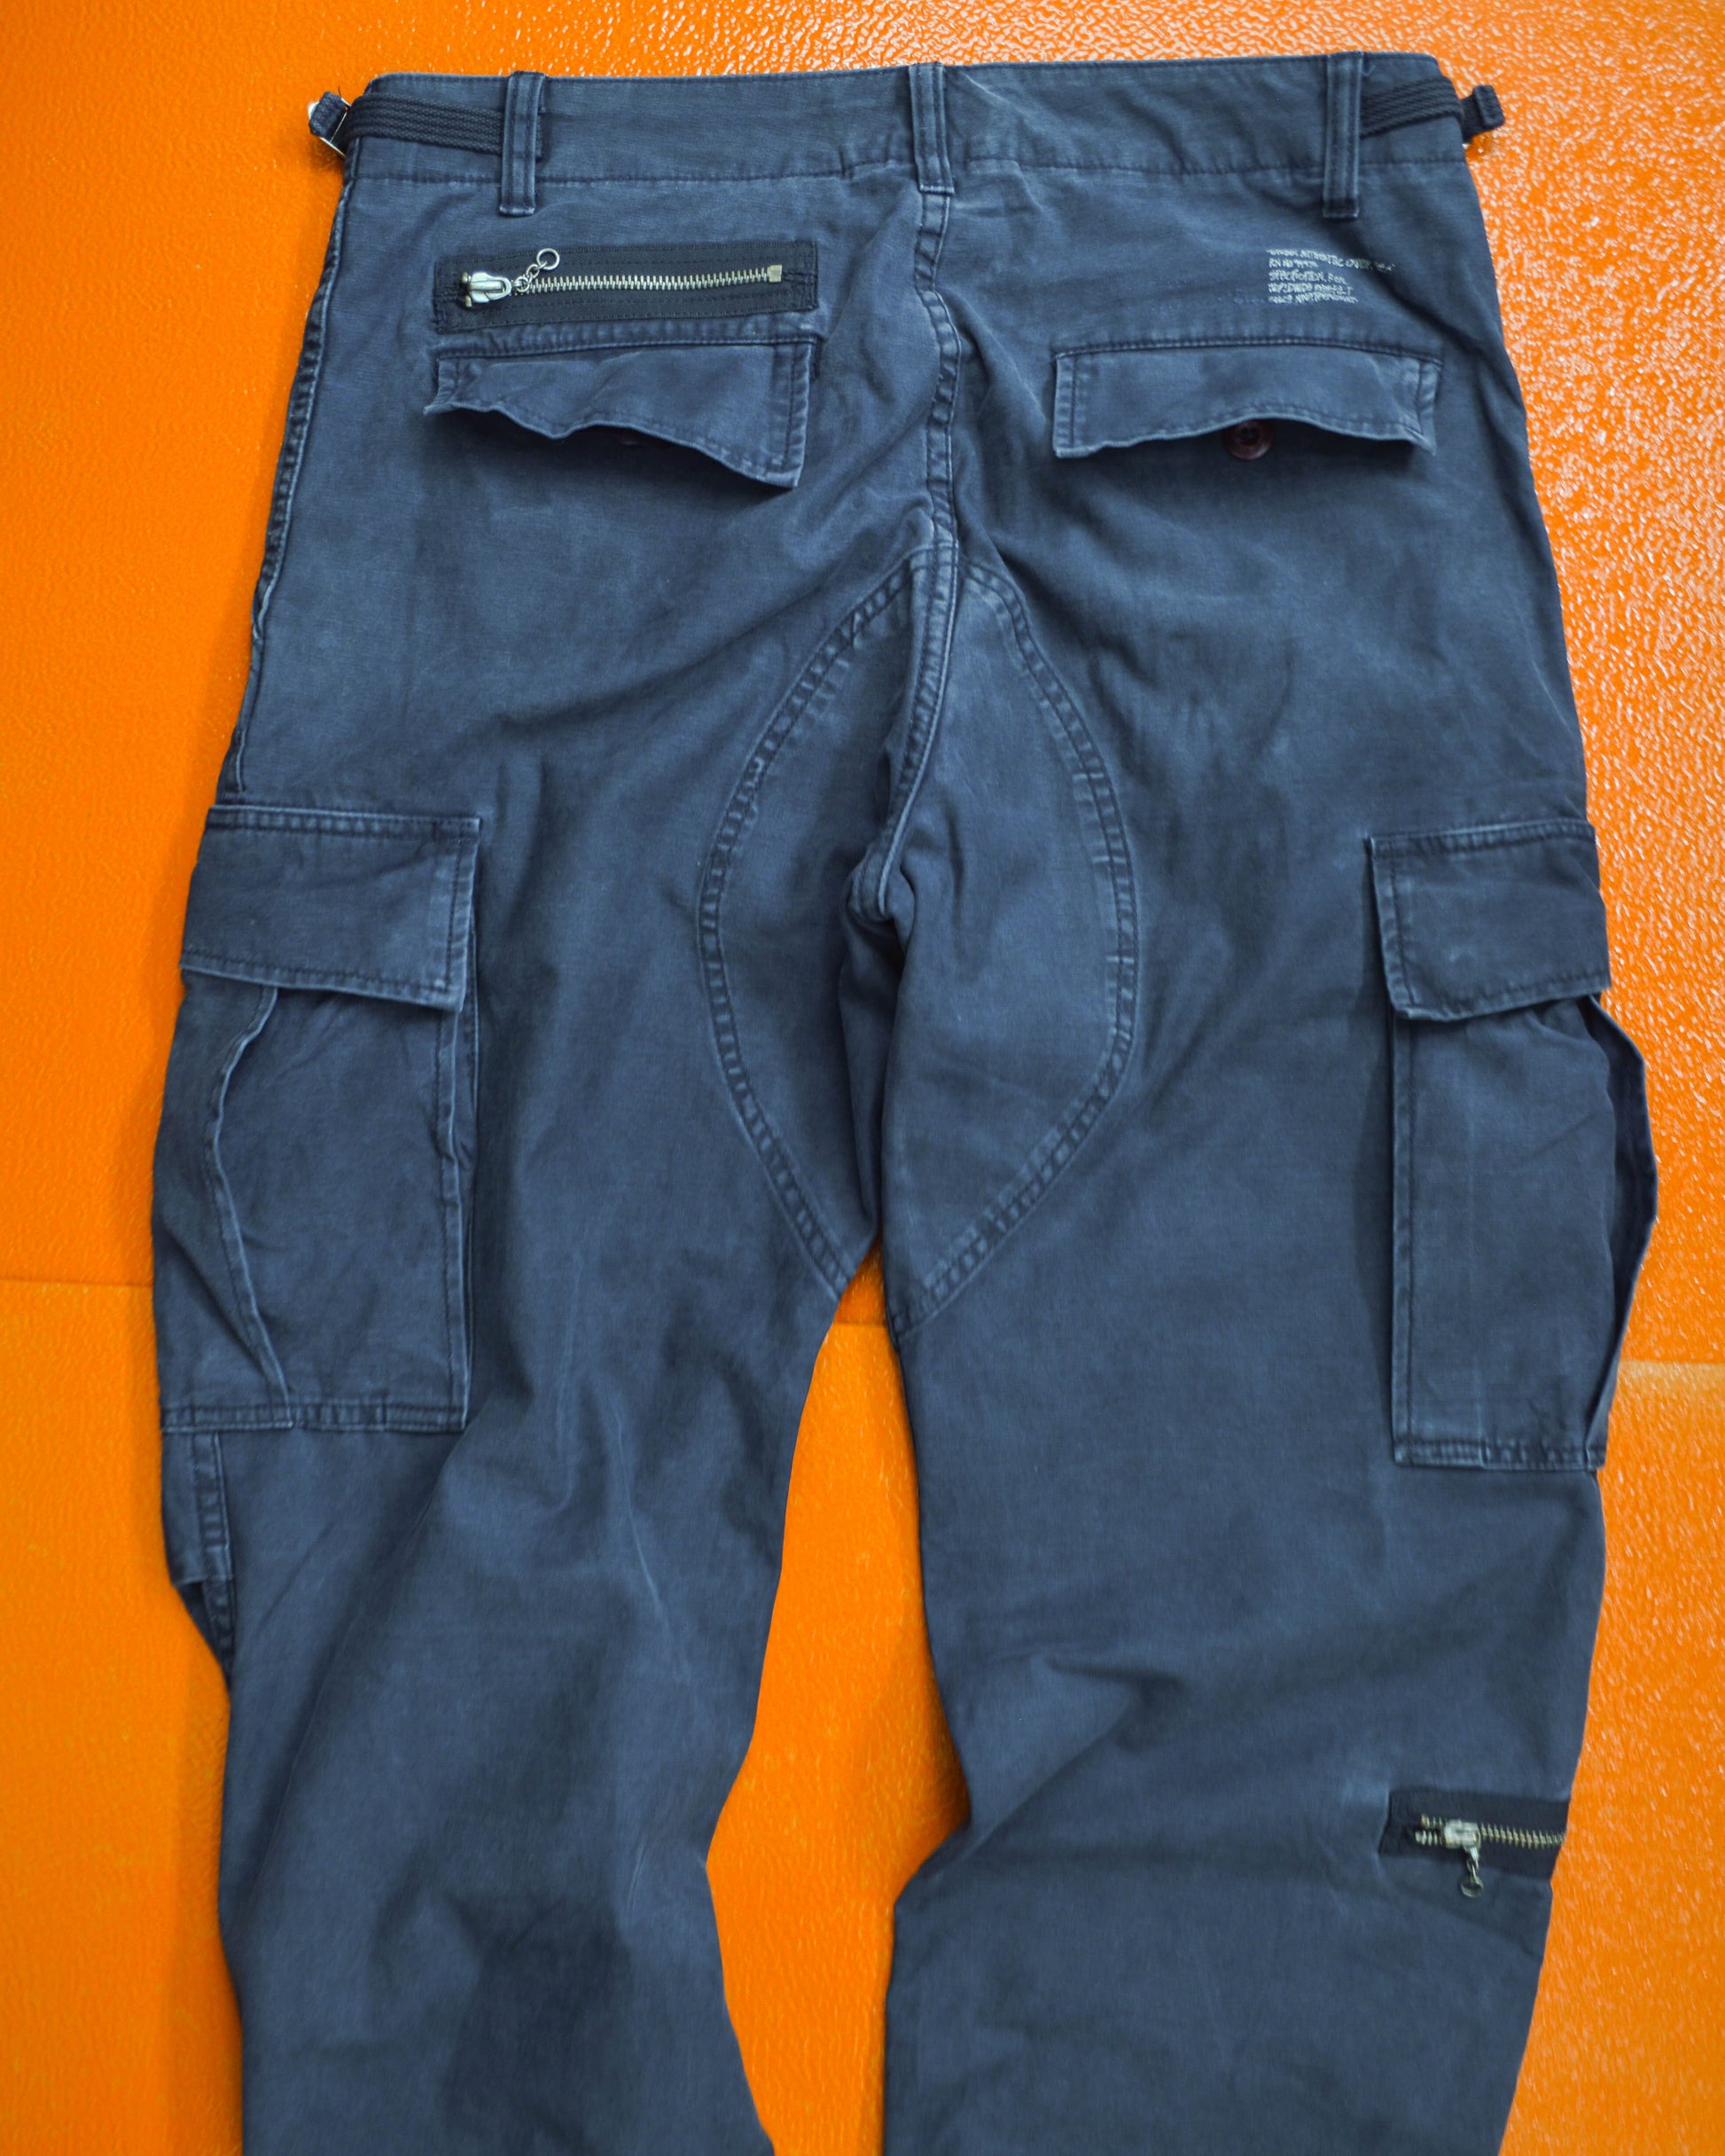 Stussy Authentic Outer Gear Washed Navy Asymmetrical Cargo Pants (~32~)